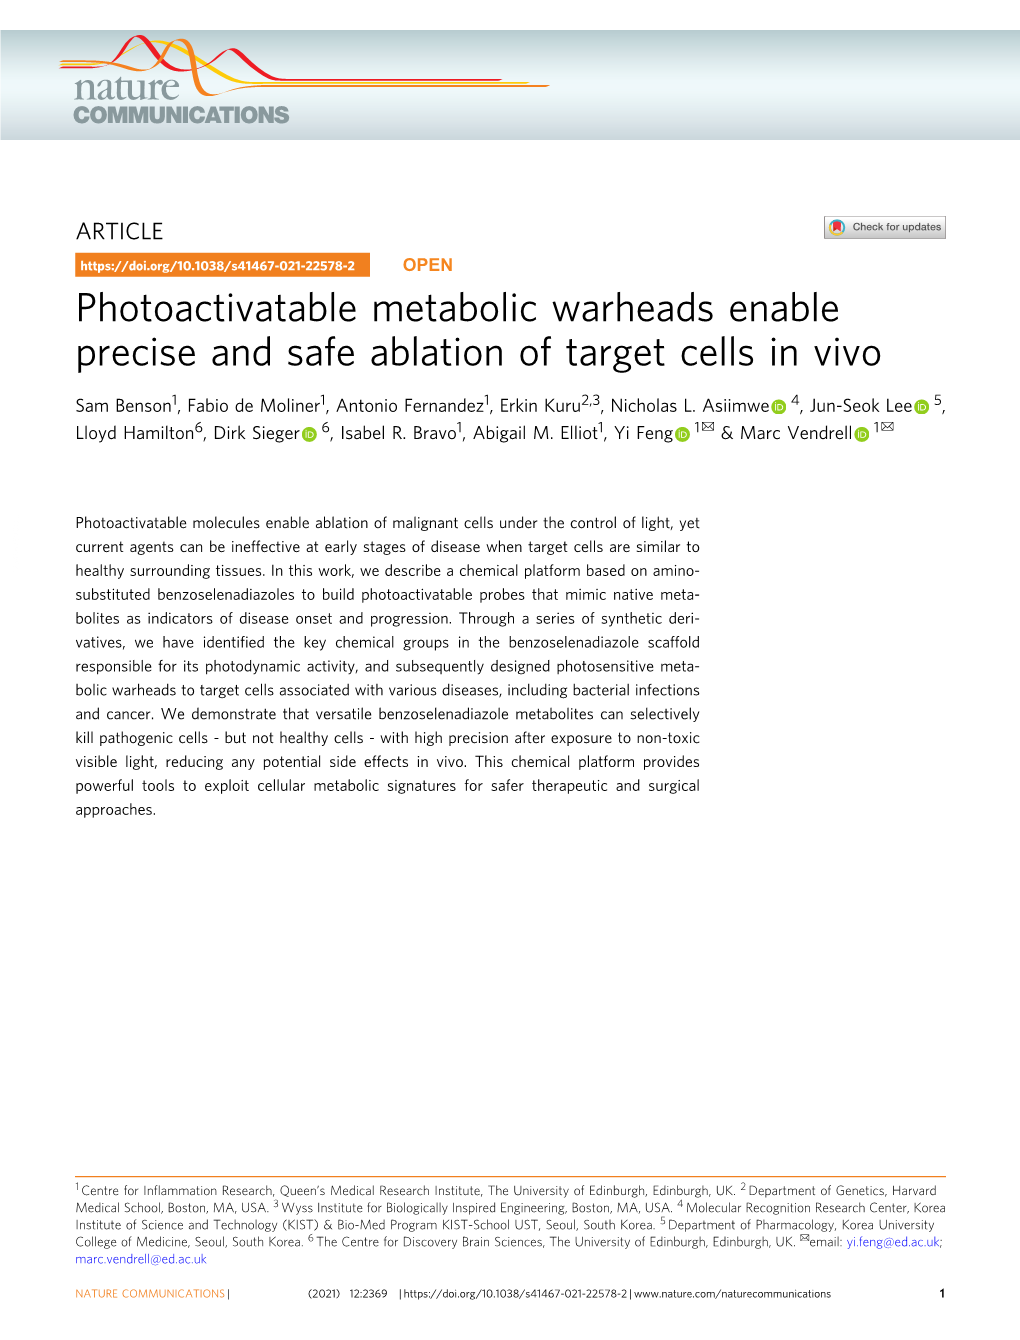 Photoactivatable Metabolic Warheads Enable Precise and Safe Ablation of Target Cells in Vivo